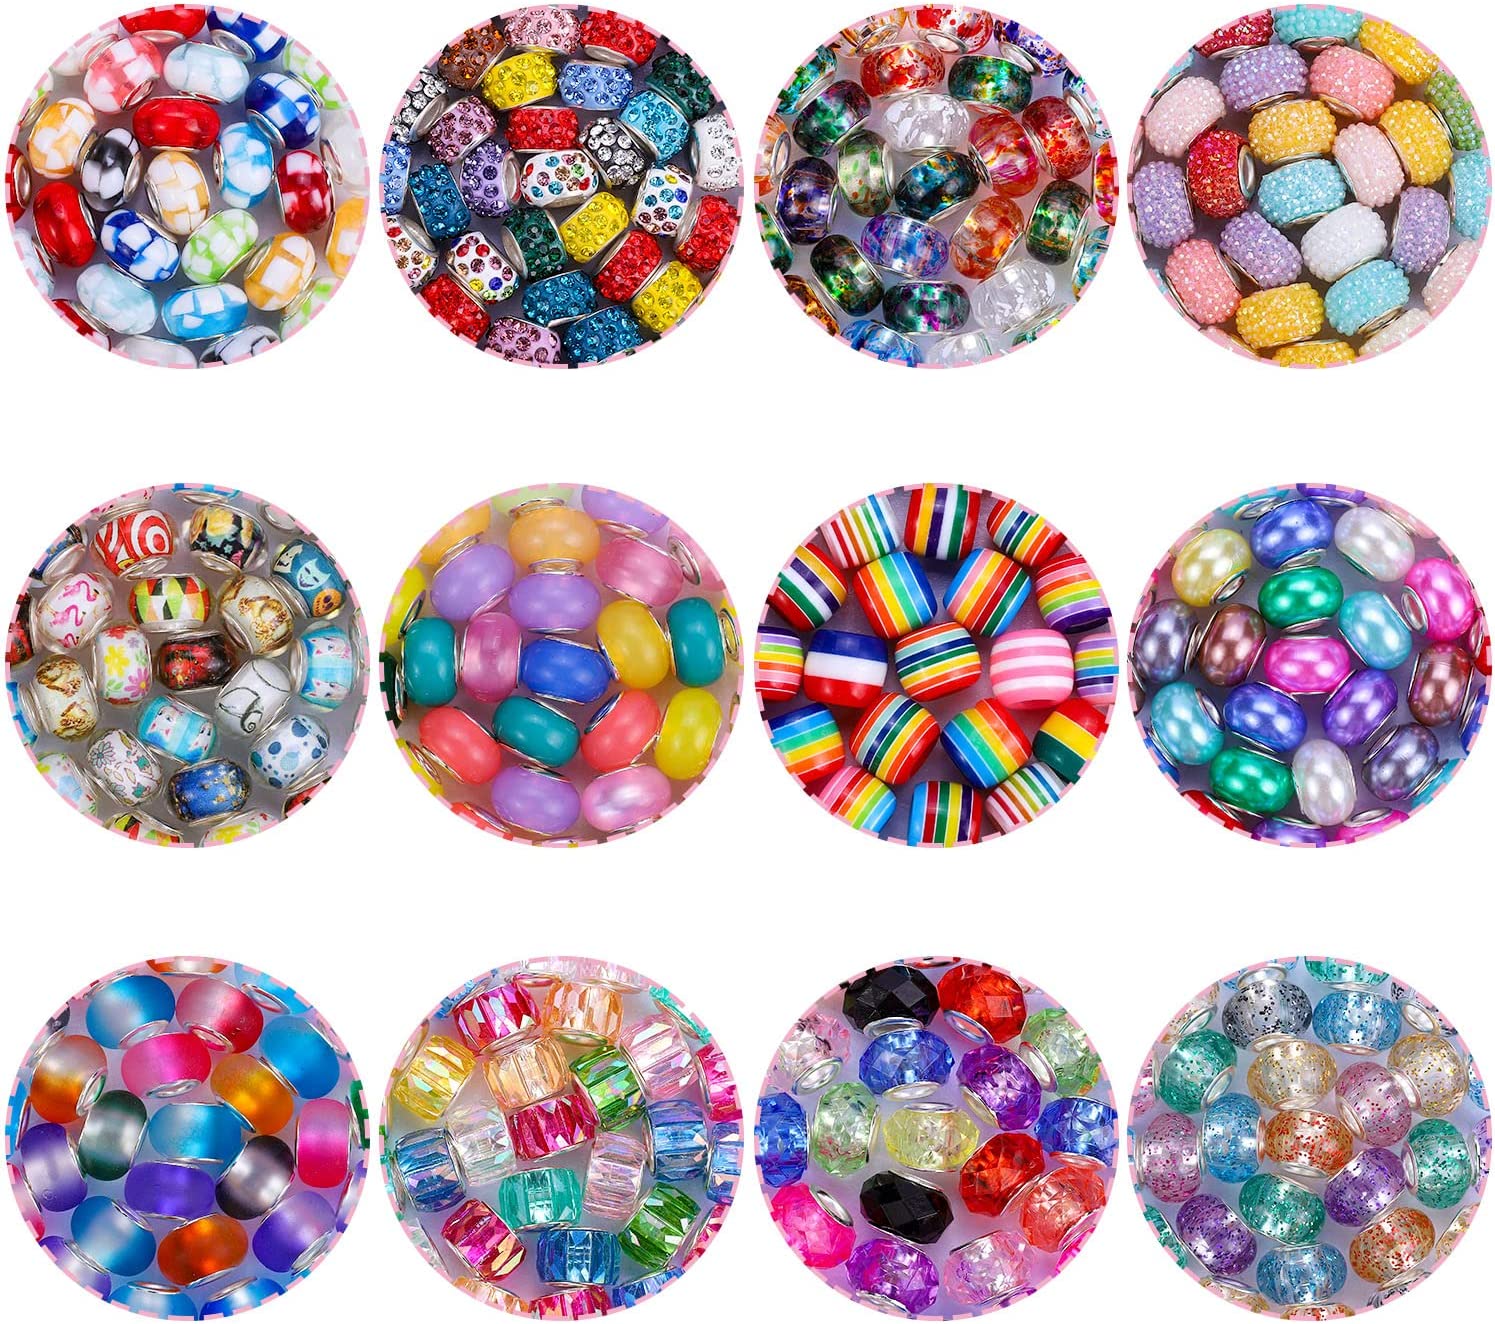 Assortment European Large Hole Spacer Beads,Fairy Garden Beads Rhinestone  Craft Beads for DIY Charms Bracelet Jewelry Making (12 Style)